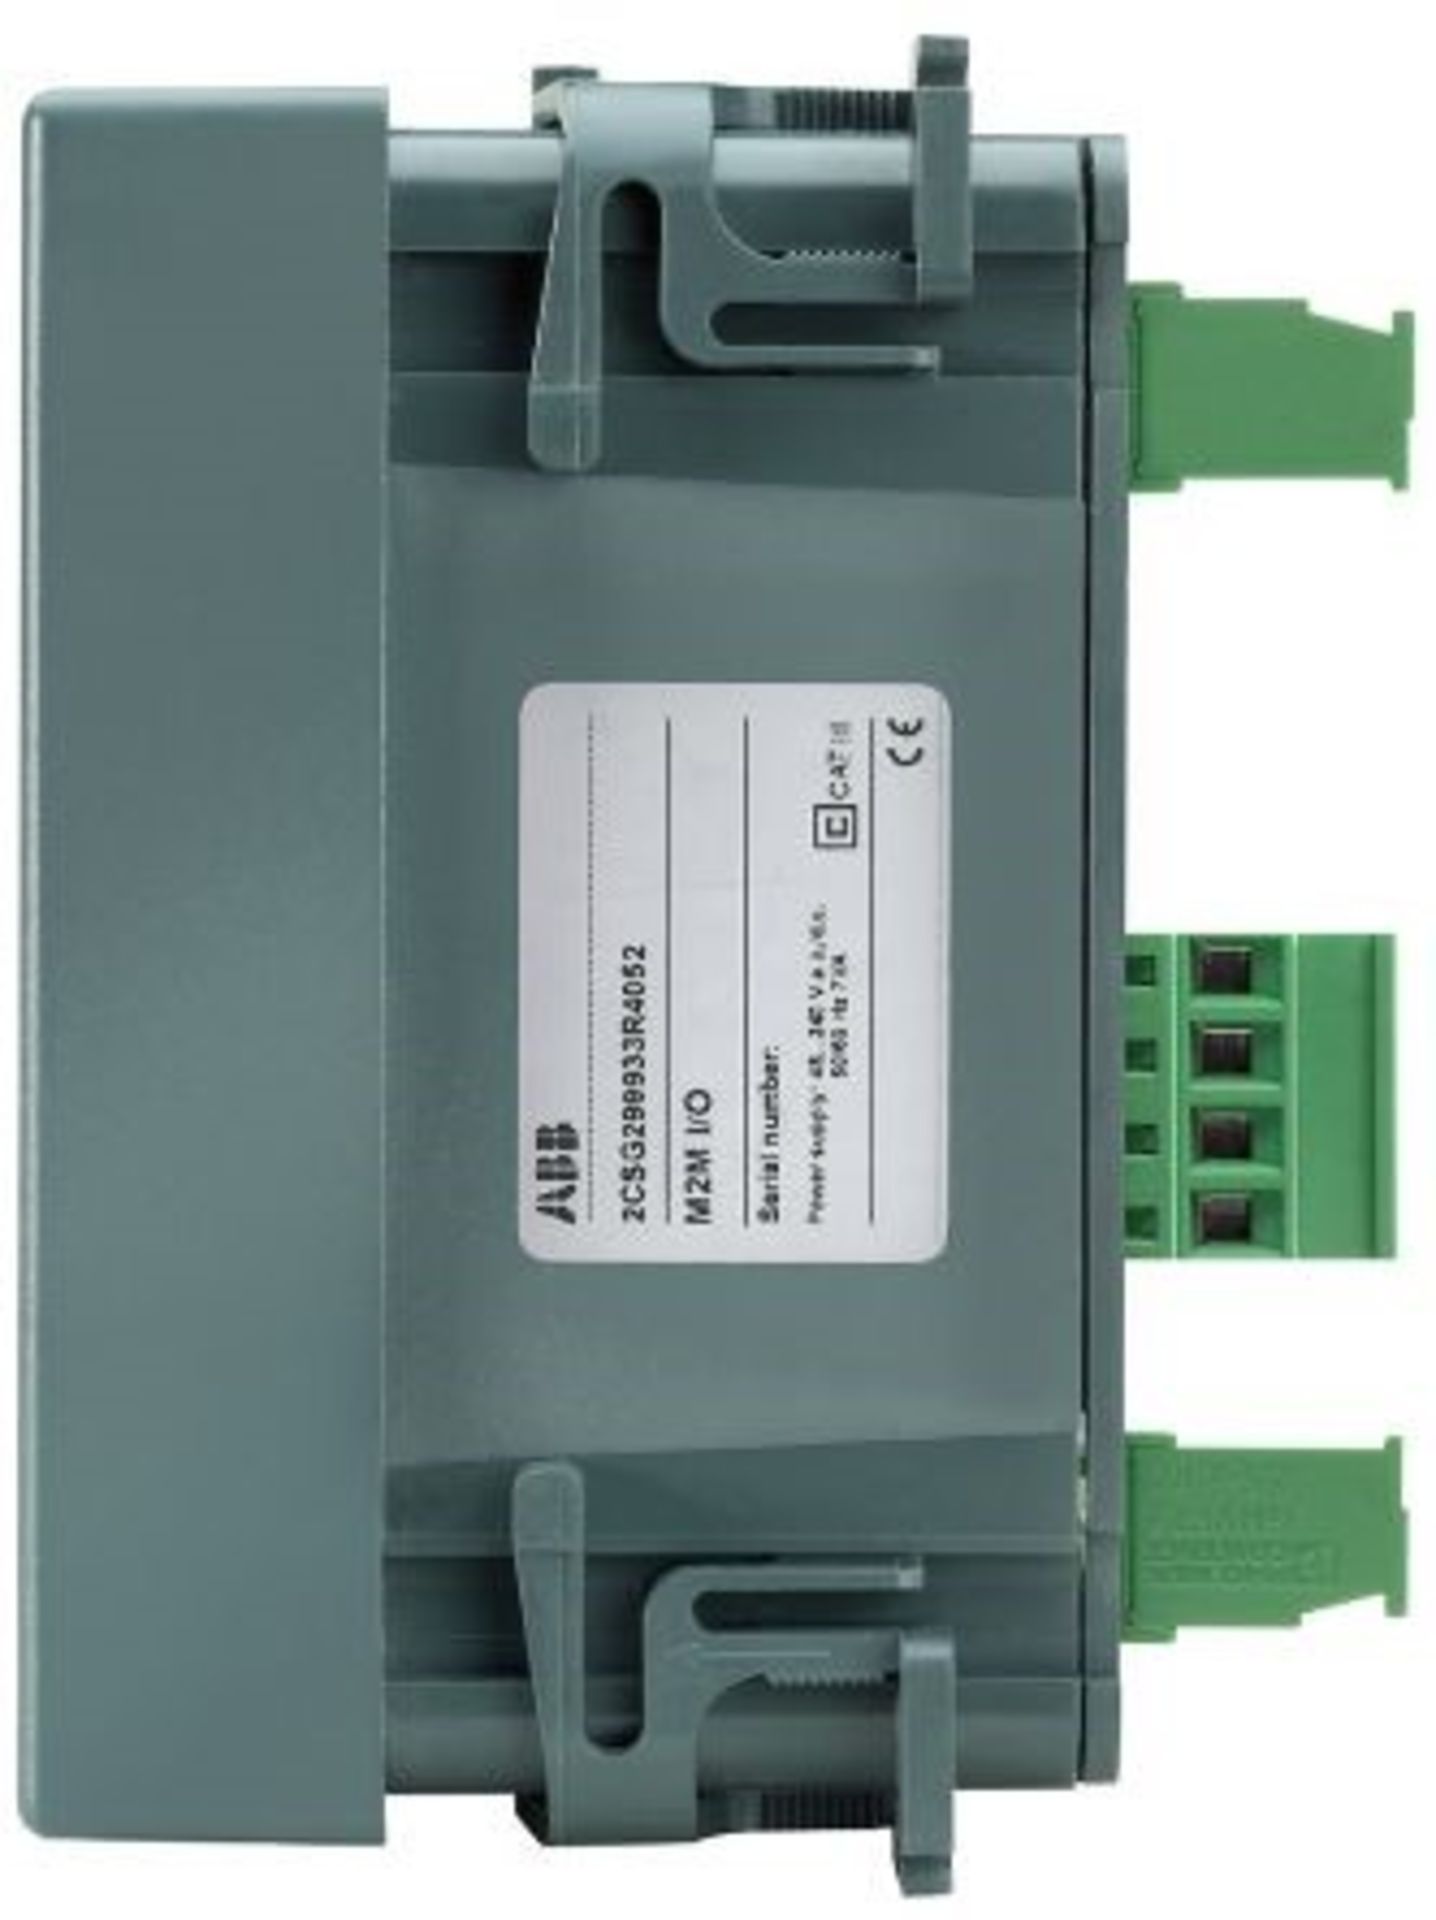 ABB M2M 1, 3 Phase Digital Power Meter with Pulse Output - Image 2 of 2